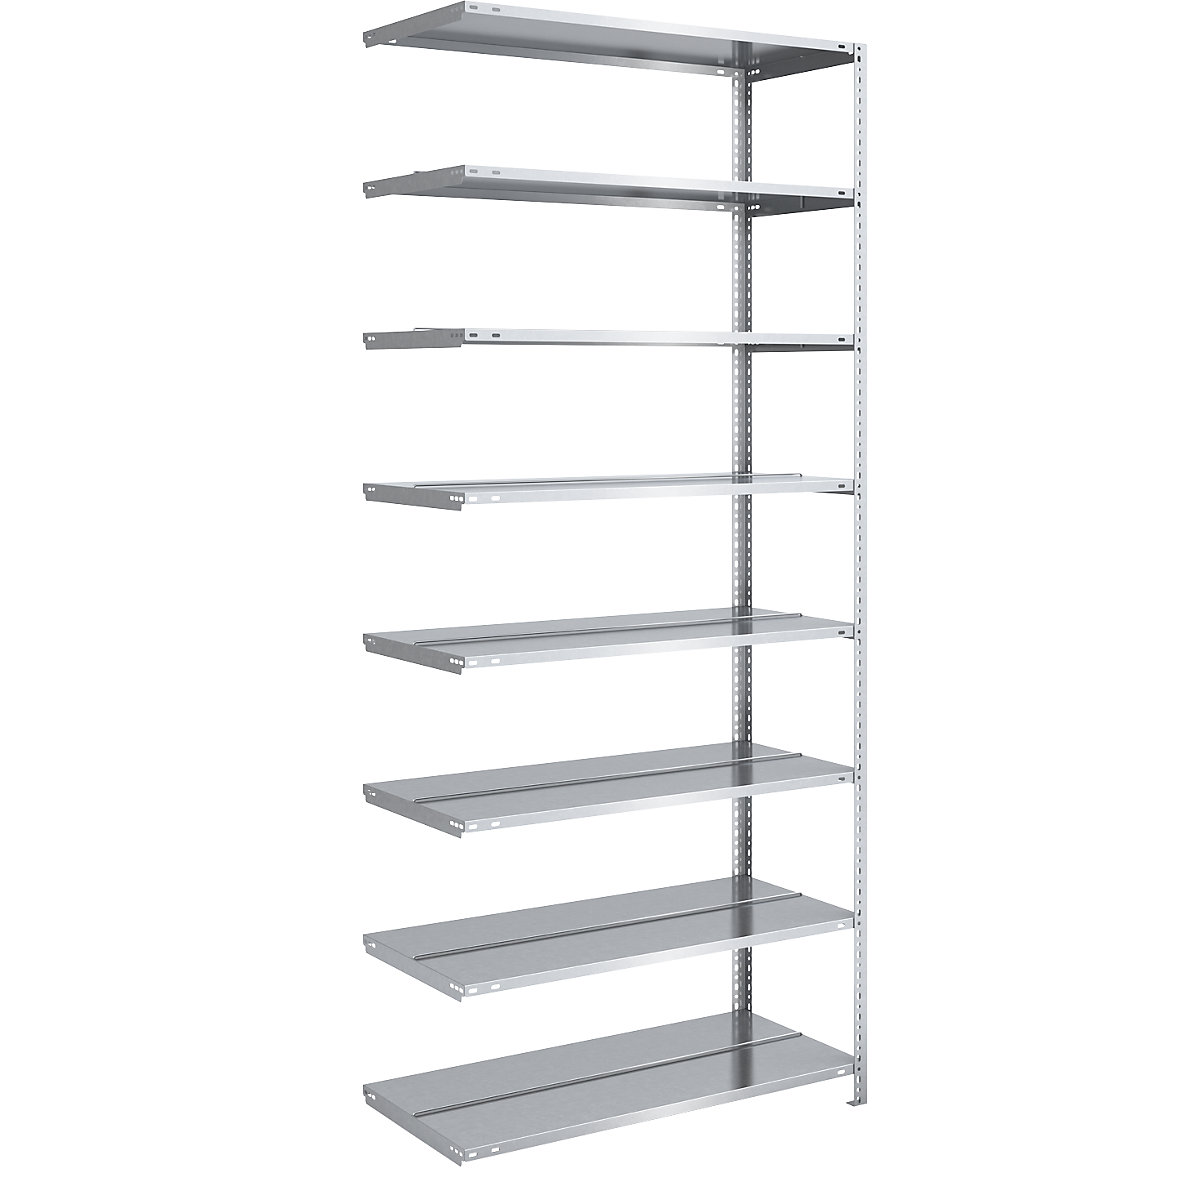 Bolt-together archive shelving, zinc plated – hofe, shelf height 2550 mm, double sided, extension shelf, width X depth 1000 x 600 mm-5